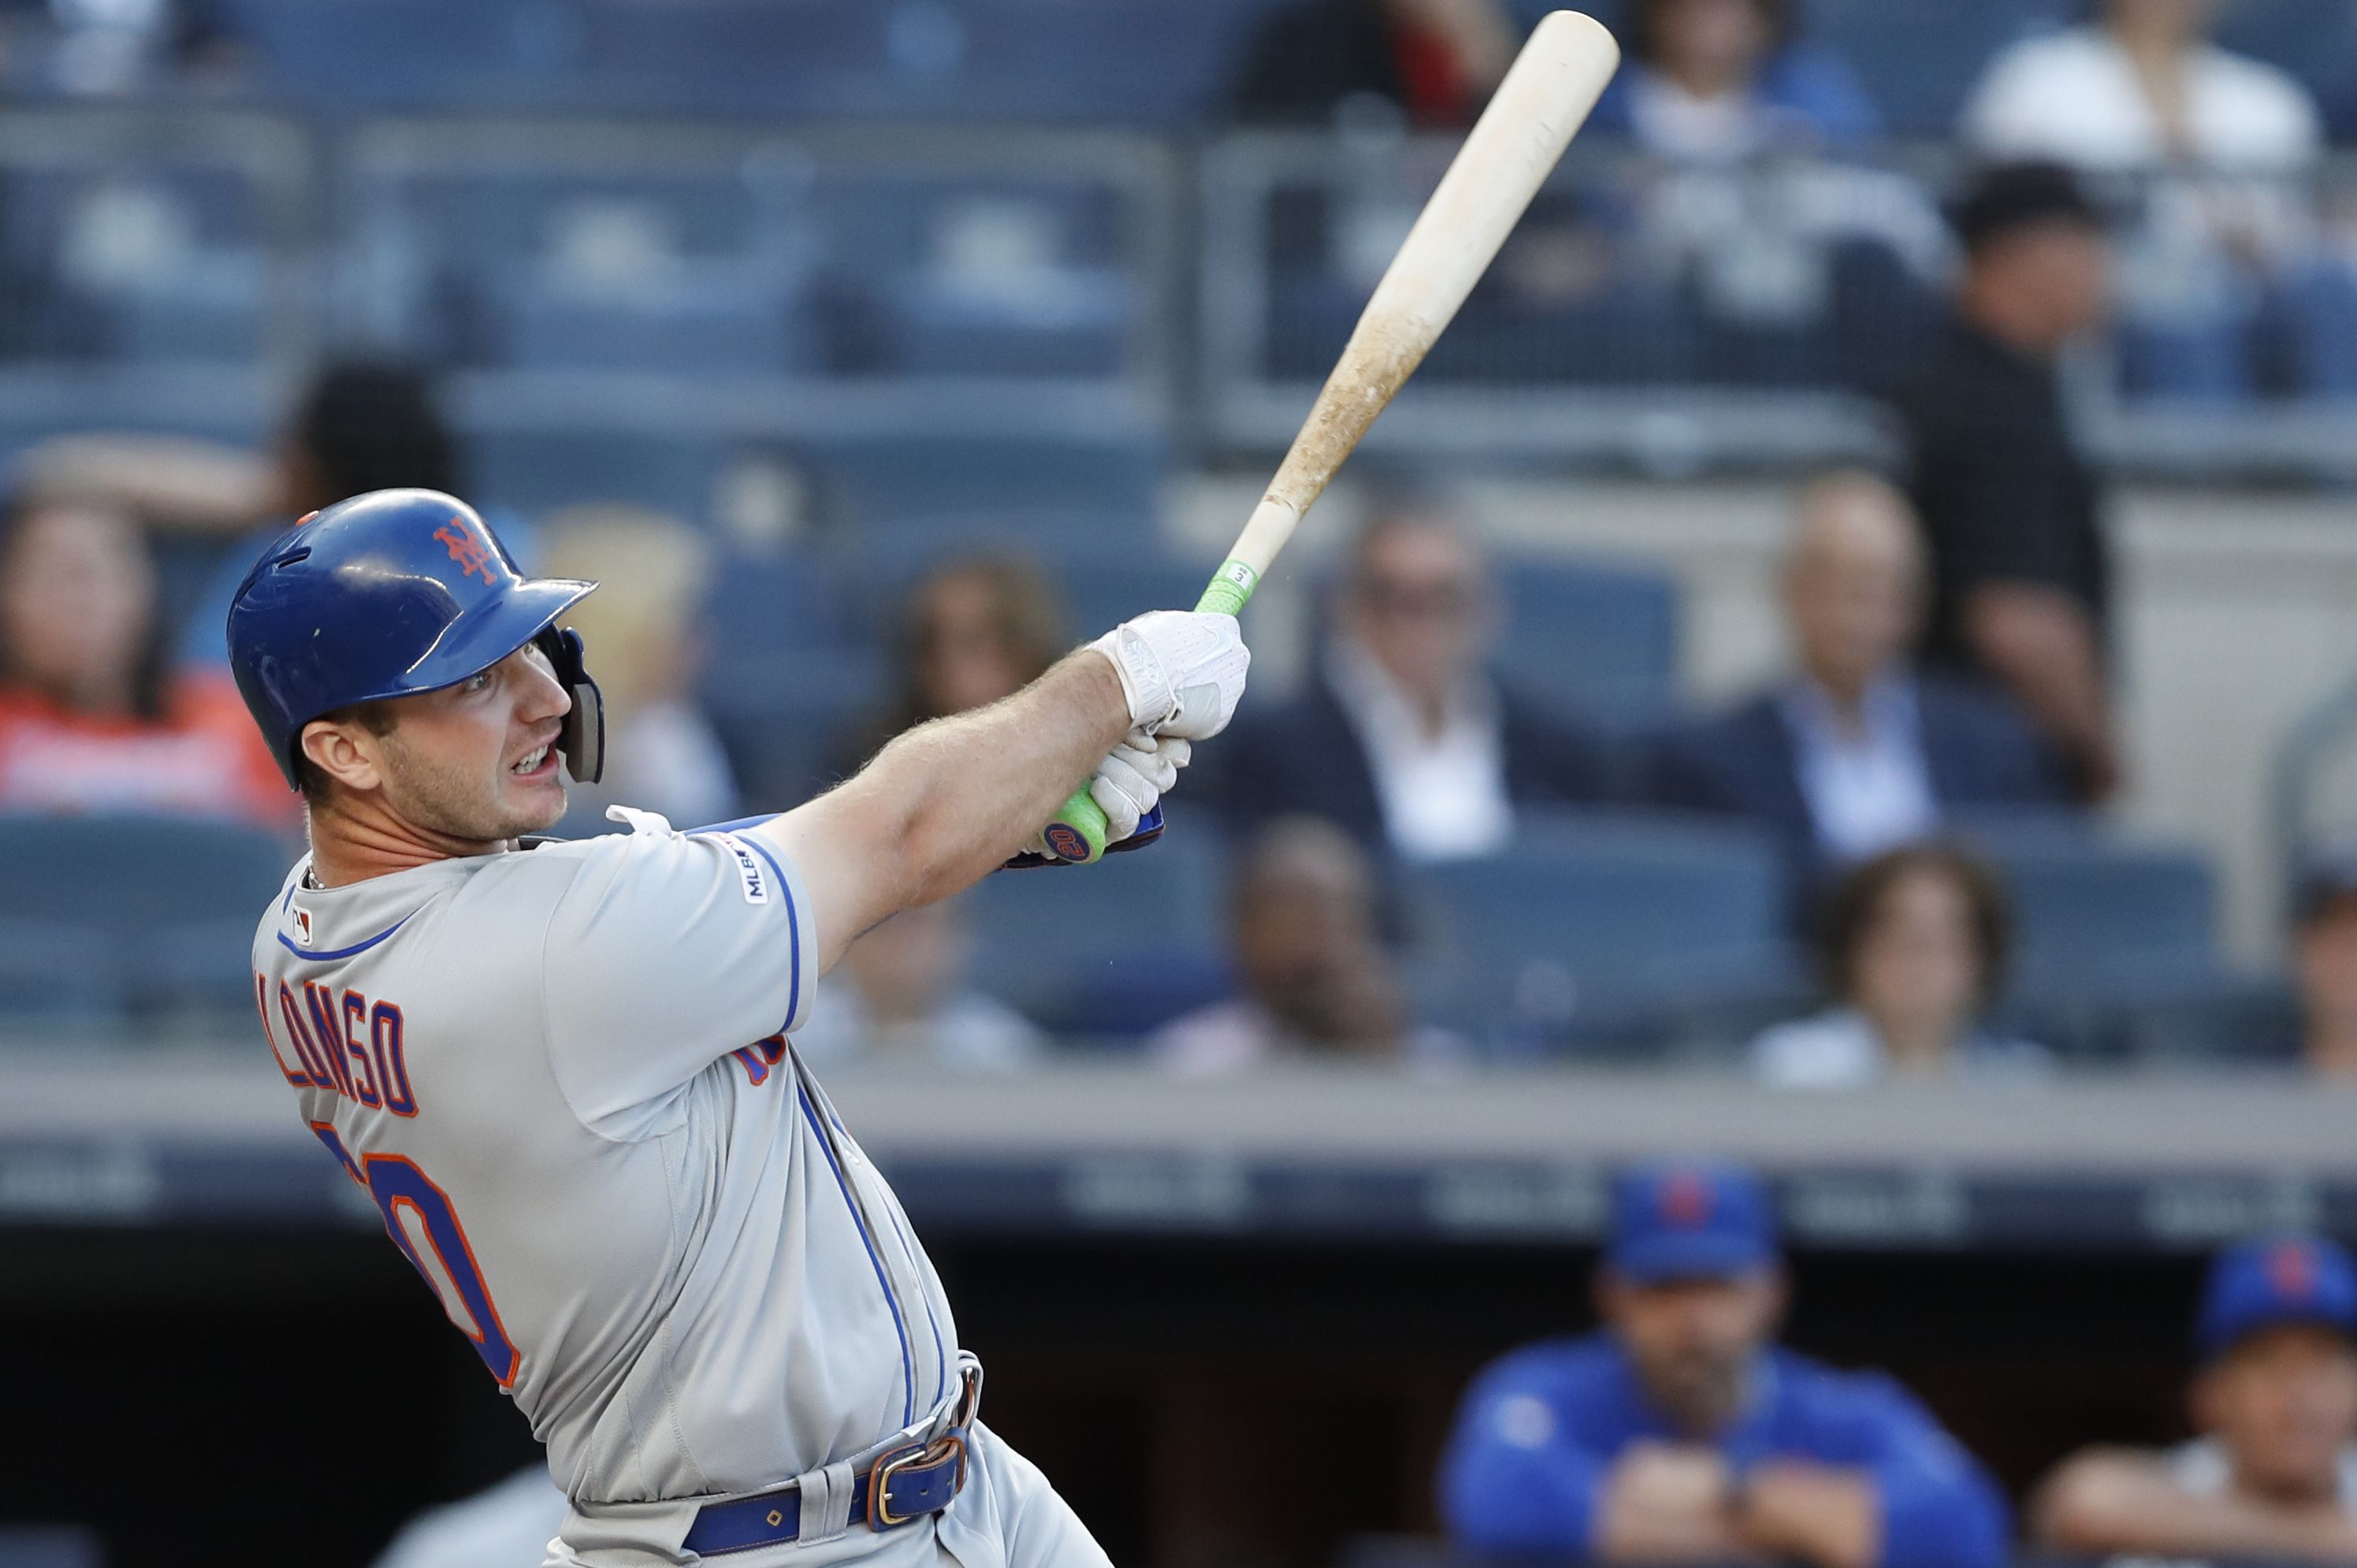 Former Gator Pete Alonso to participate in HR Derby and All-Star Game